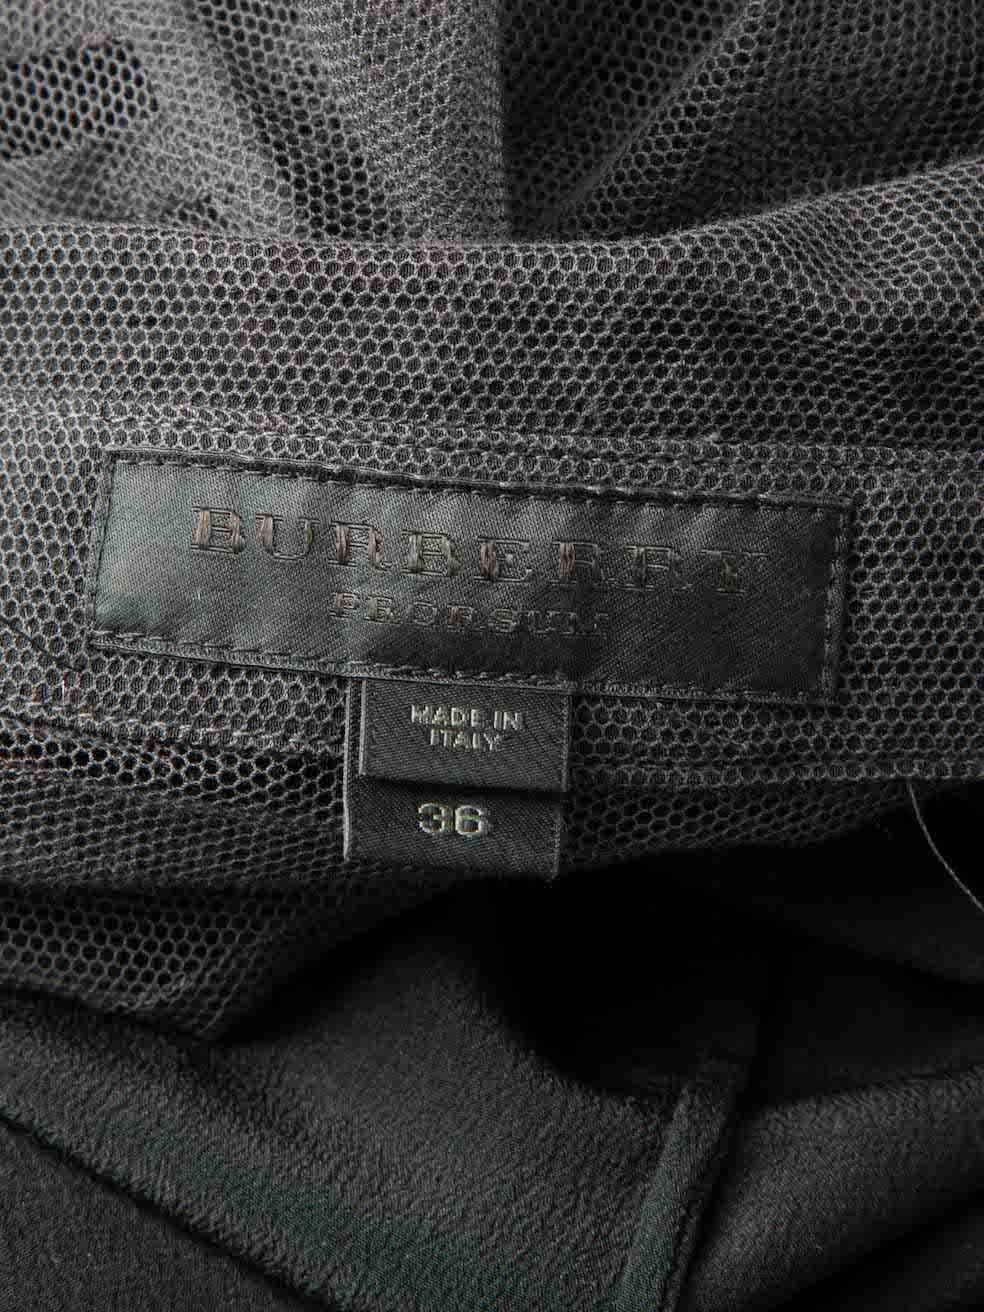 Burberry Burberry Prorsum Grey Sheer Layered Collared Dress Size XXS In Excellent Condition In London, GB